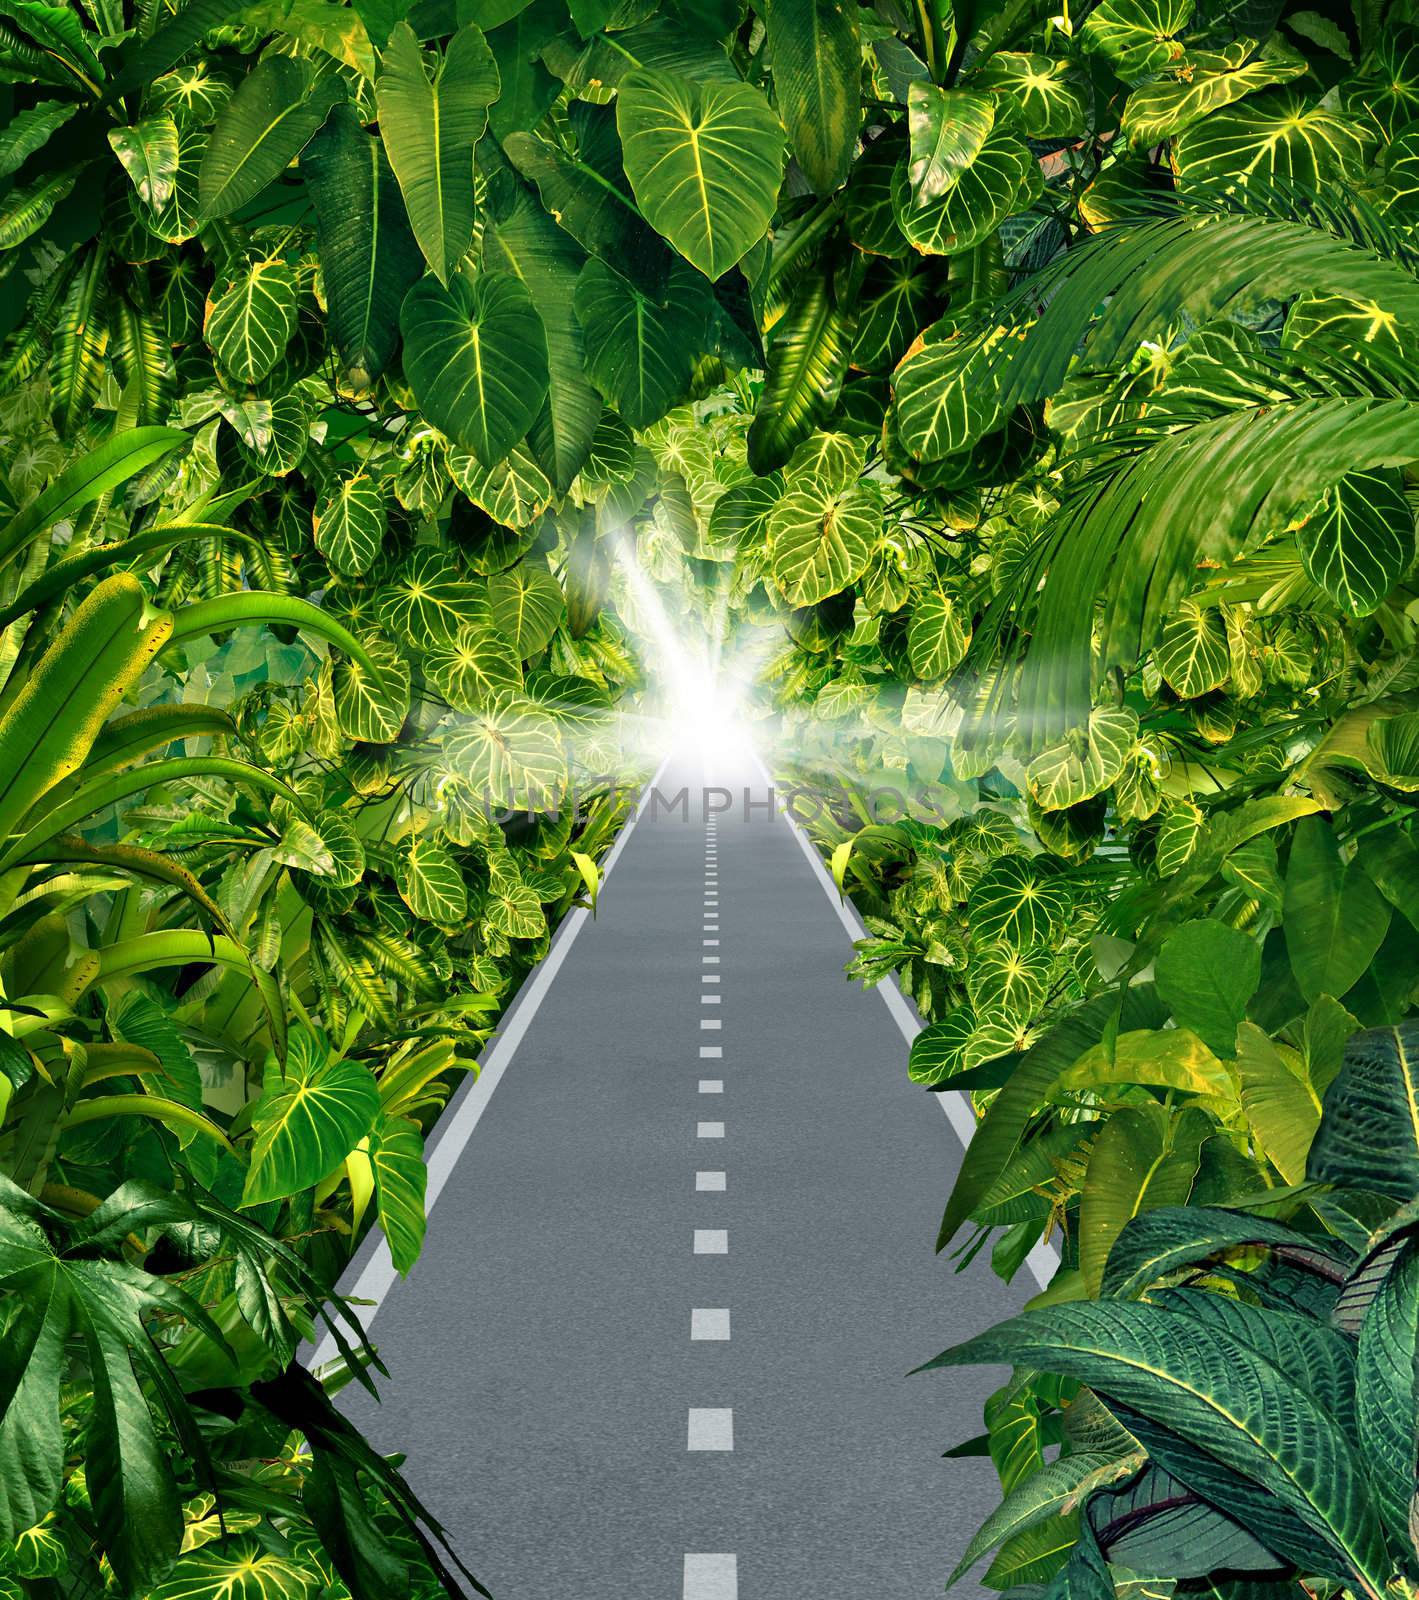 Escape the jungle as a business symbol of escaping the chaos and dangers of city life with a road through a dark thick tropical forest leading to a beaming light of hope out of the hazardous wilderness.